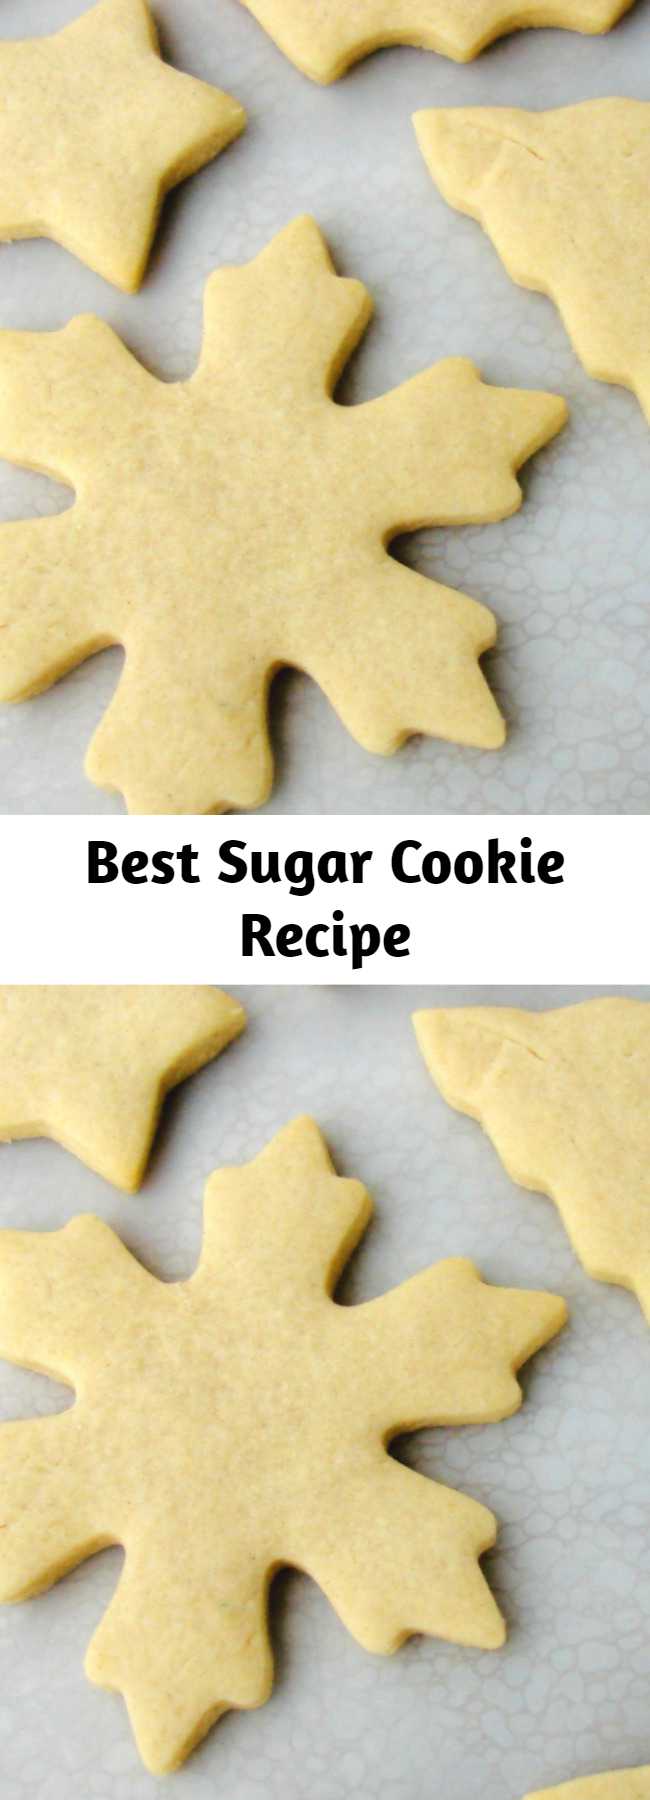 Best Sugar Cookie Recipe - This is the BEST sugar cookie recipe– no chilling the dough, cookies keep their shape when baked, soft and flavorful, perfect for decorating. Soft cut out sugar cookie recipe that keeps its shape and dough does not need to be chilled before baking- perfect edges every time!